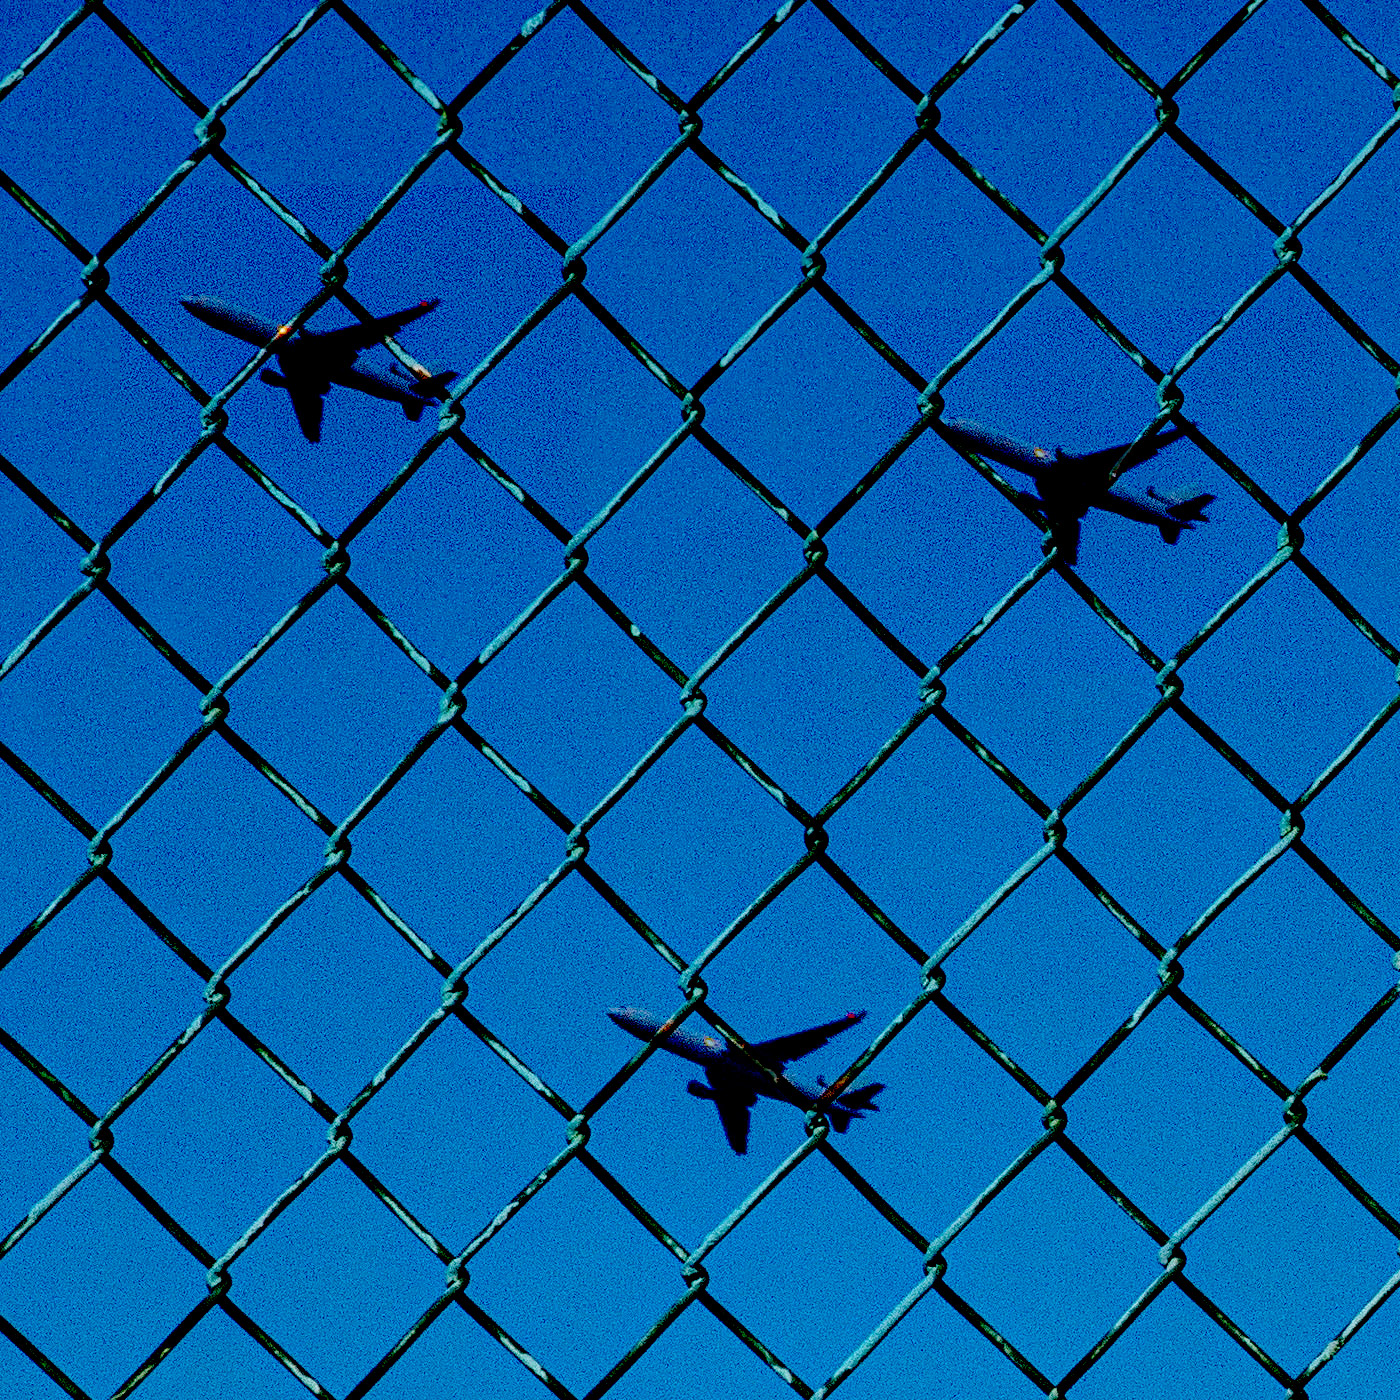 three airplanes against a blue sky overlaid with a chain link fence